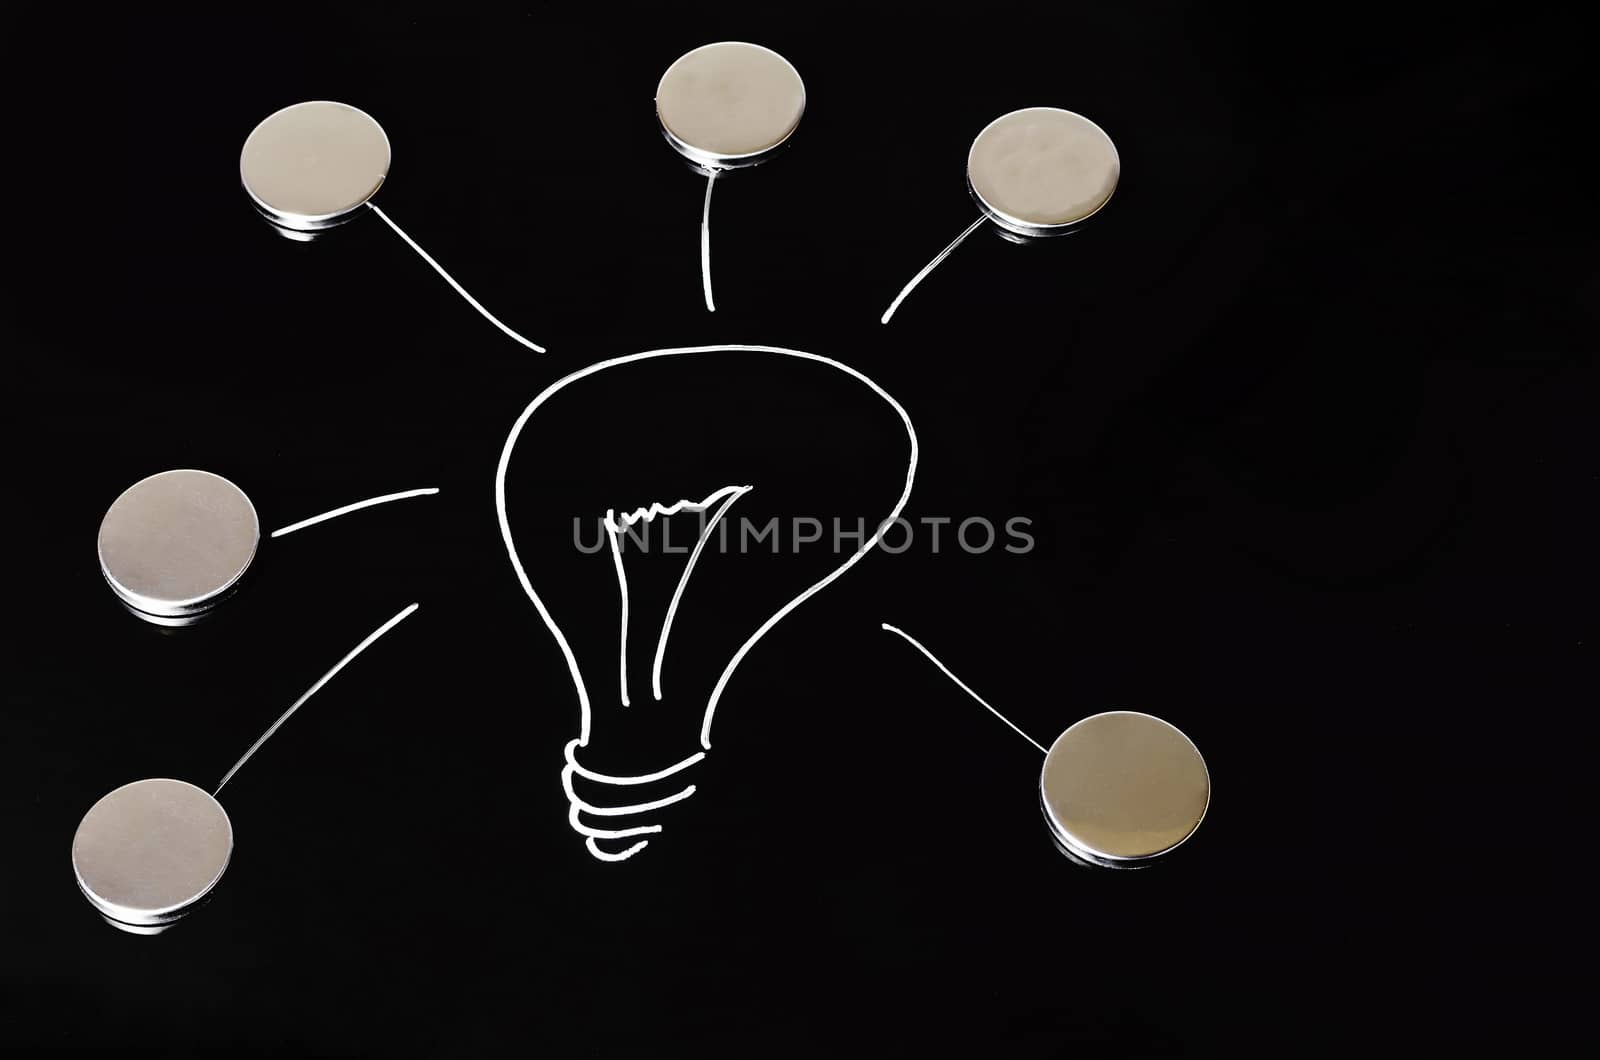 A glowing light bulb on black background drawn. Symbol of ideas, concepts and creativity.